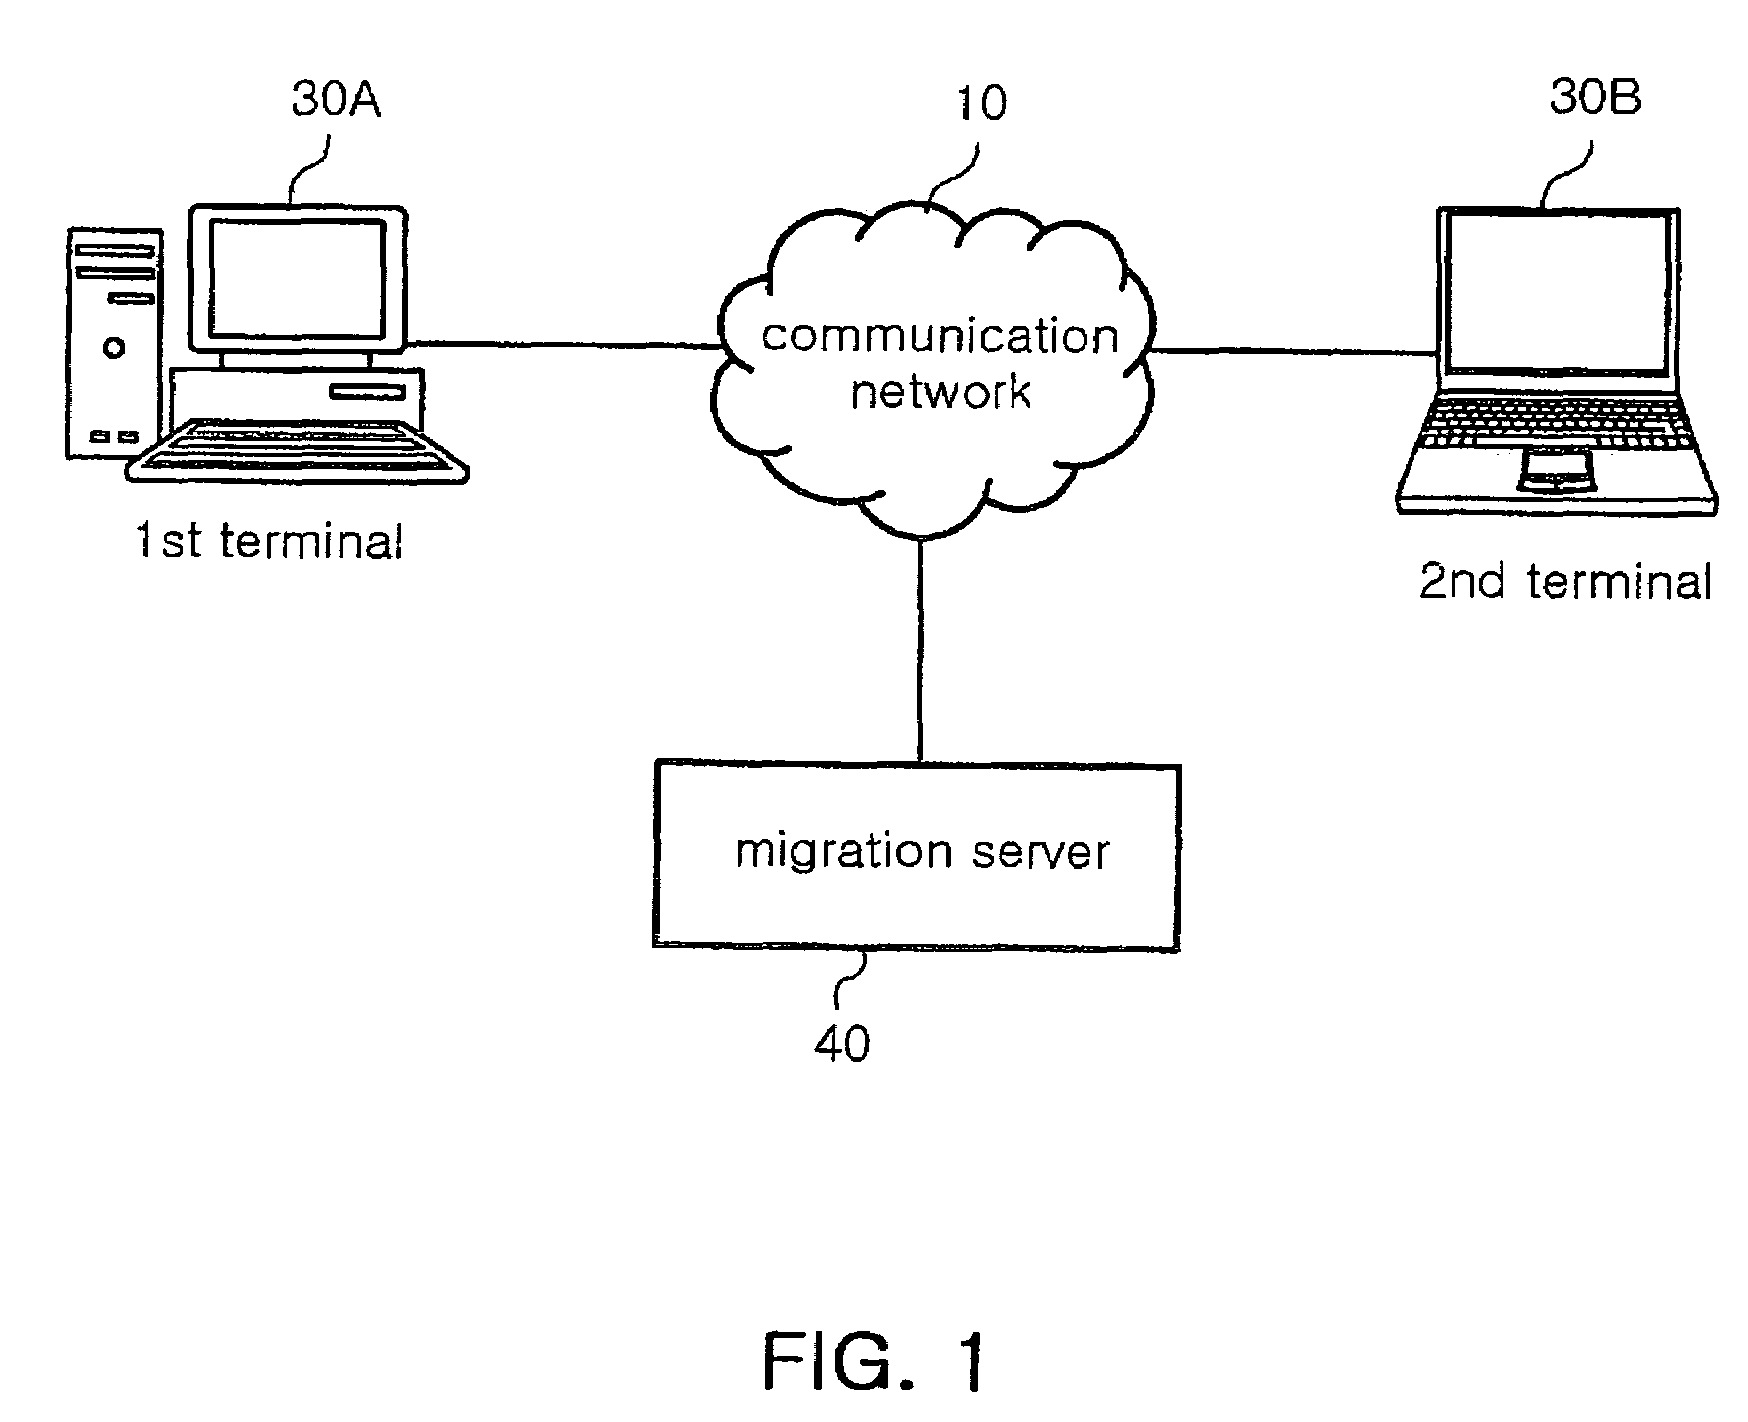 Apparatus and method for managing application context